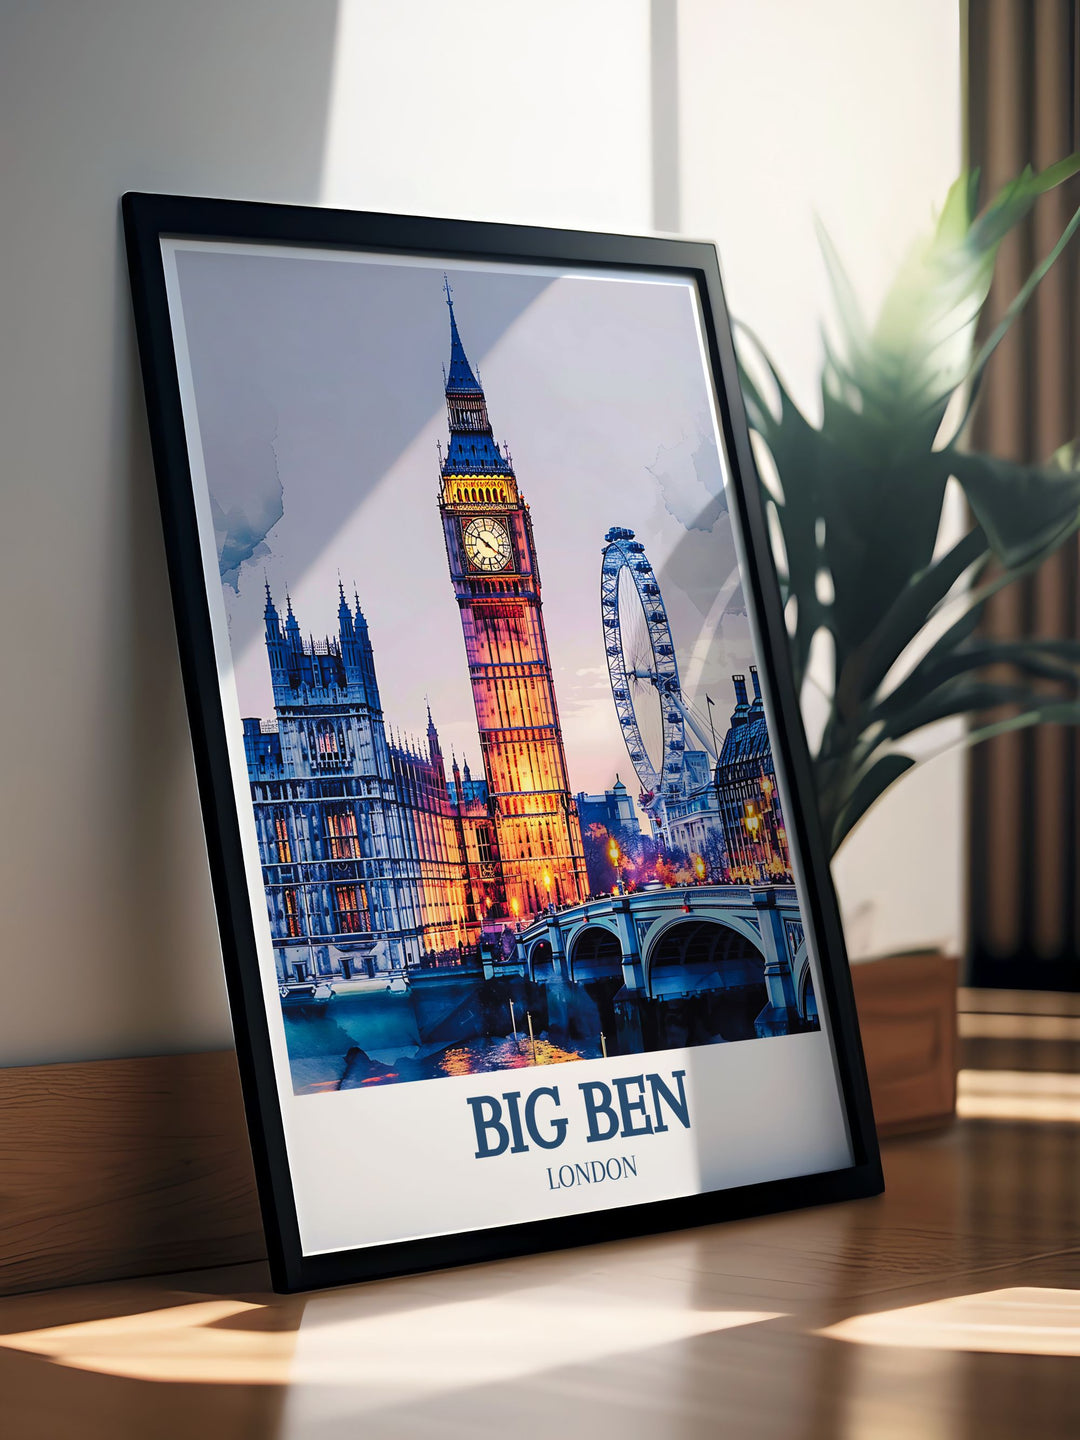 Detailed digital download of Londons Big Ben, the Houses of Parliament, and the London Eye, ideal for any art collection or as a memorable travel keepsake. Enhances your home with Londons historic charm.